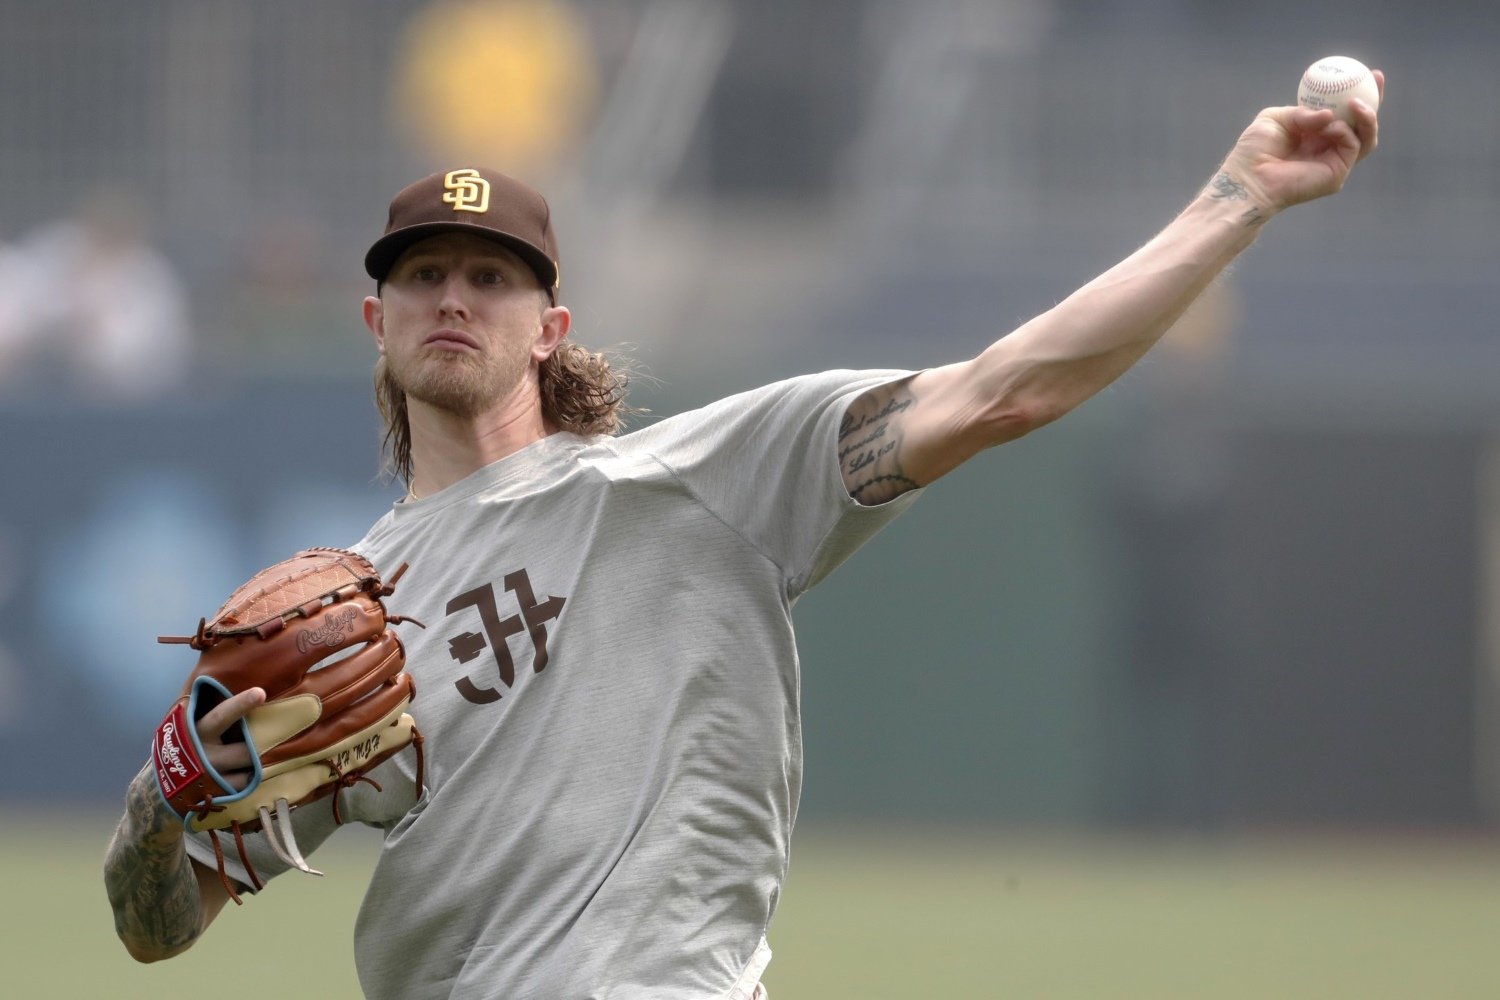 Bring Him Home: How the Brewers Could Reunite With Josh Hader